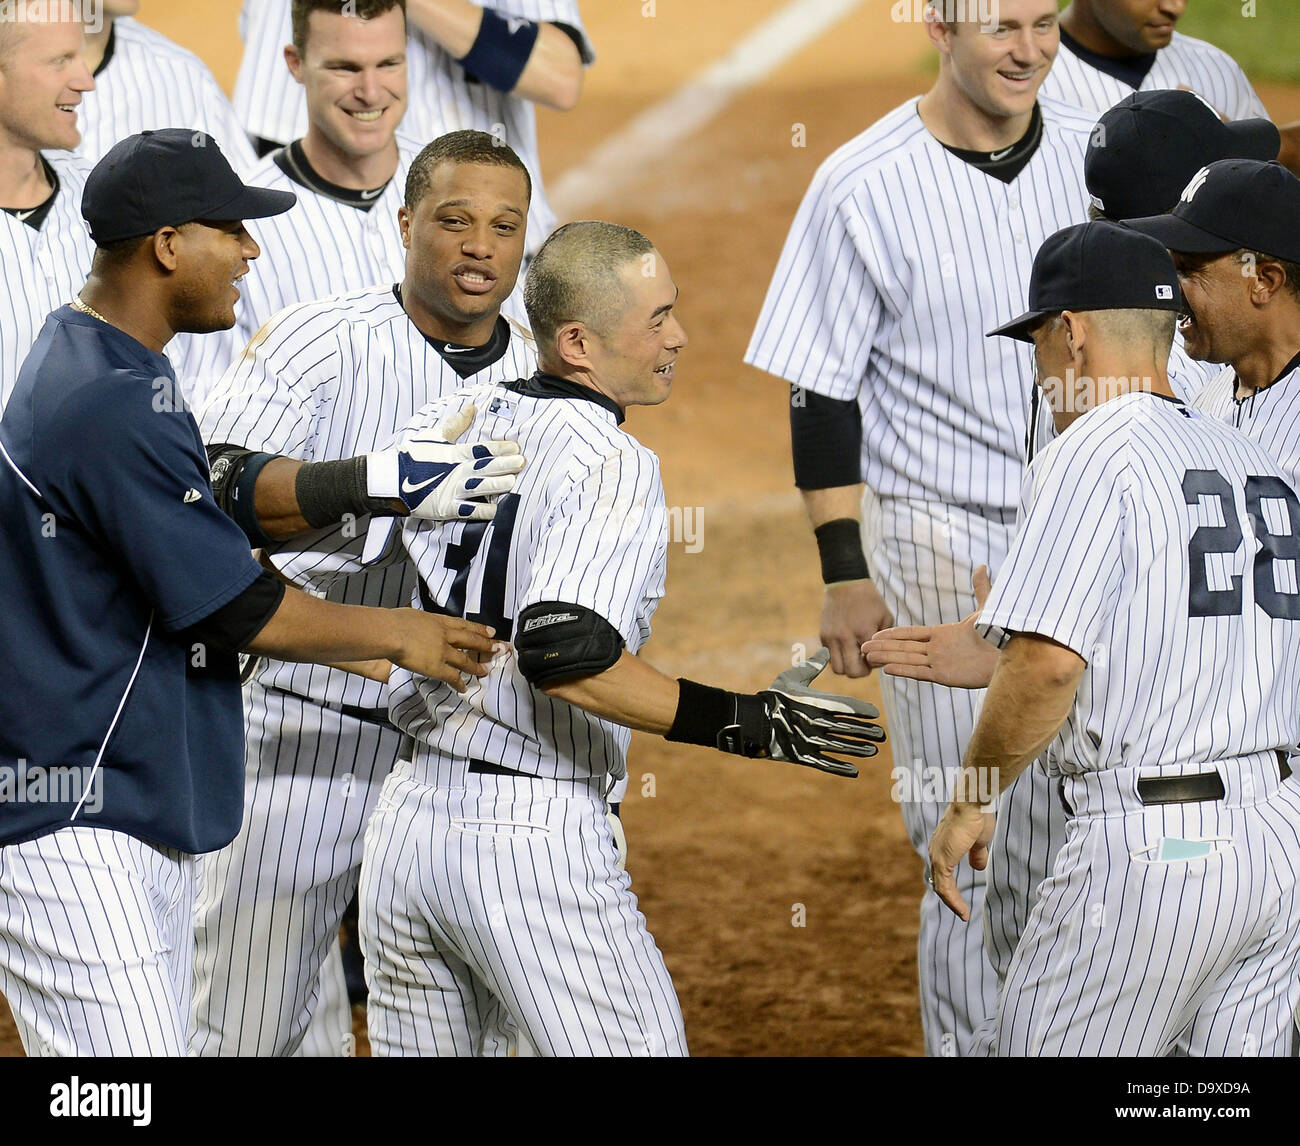 Ichiro Suzuki (Yankees), JUNE 25, 2013 - MLB : Ichiro Suzuki of the New York Yankees celebrates with his teammates at home plate after hitting a walk off home run in the ninth inning during the Major League Baseball game against the Texas Rangers at Yankee Stadium in The Bronx, New York, United States. (Photo by AFLO) Stock Photo